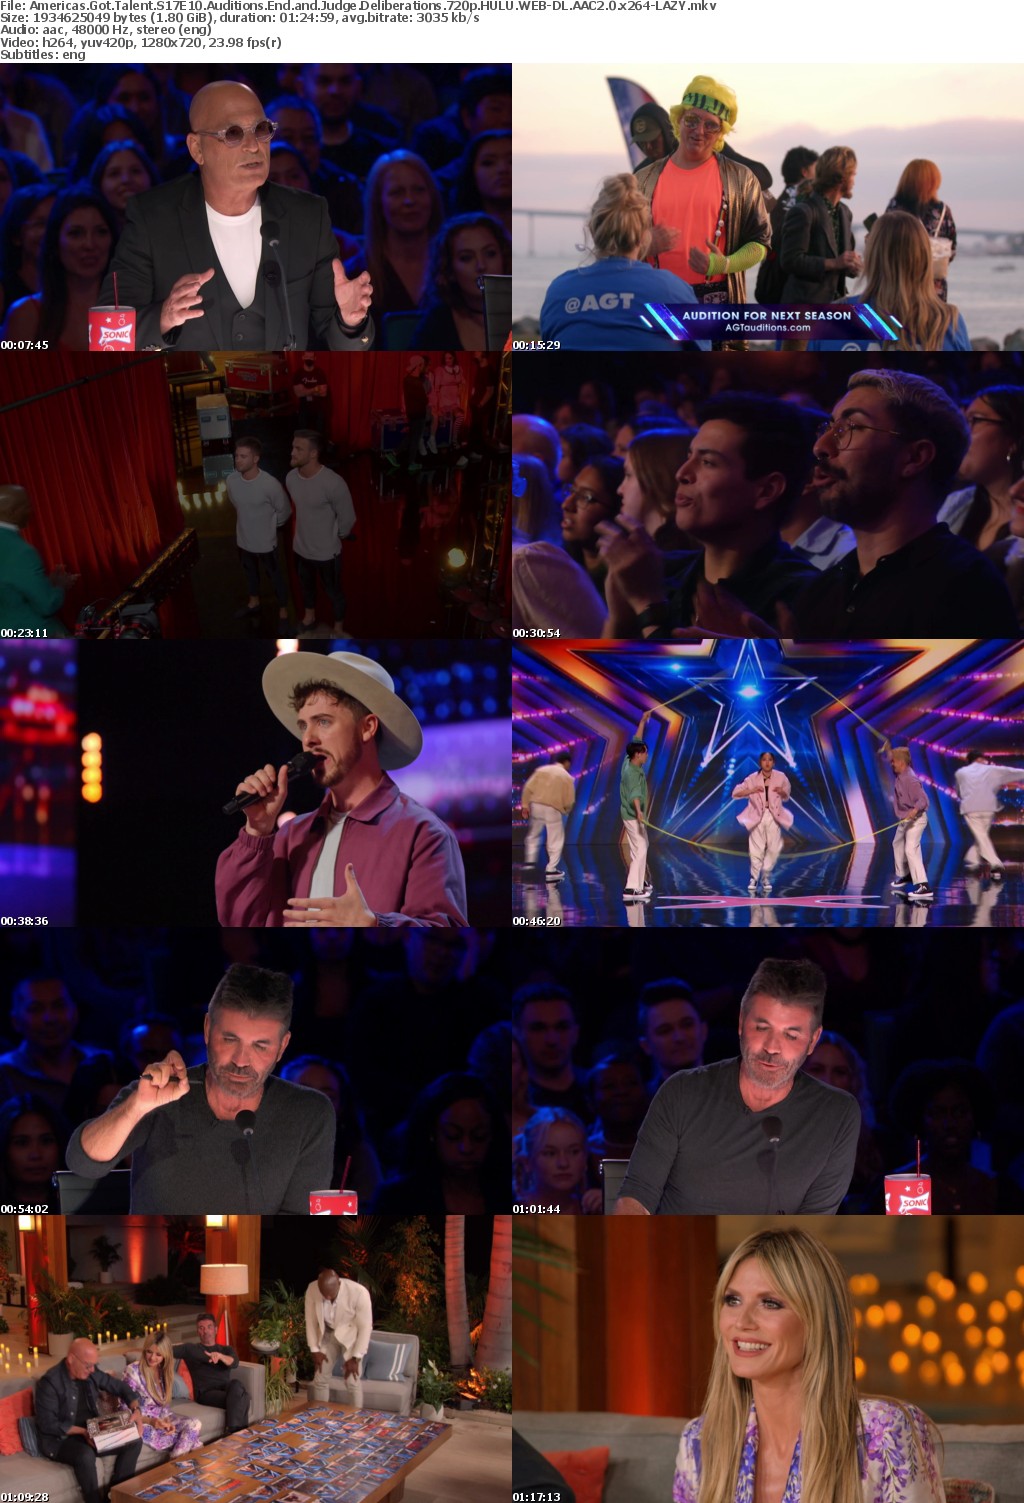 Americas Got Talent S17E10 Auditions End and Judge Deliberations 720p HULU WEBRip AAC2 0 H264-LAZY